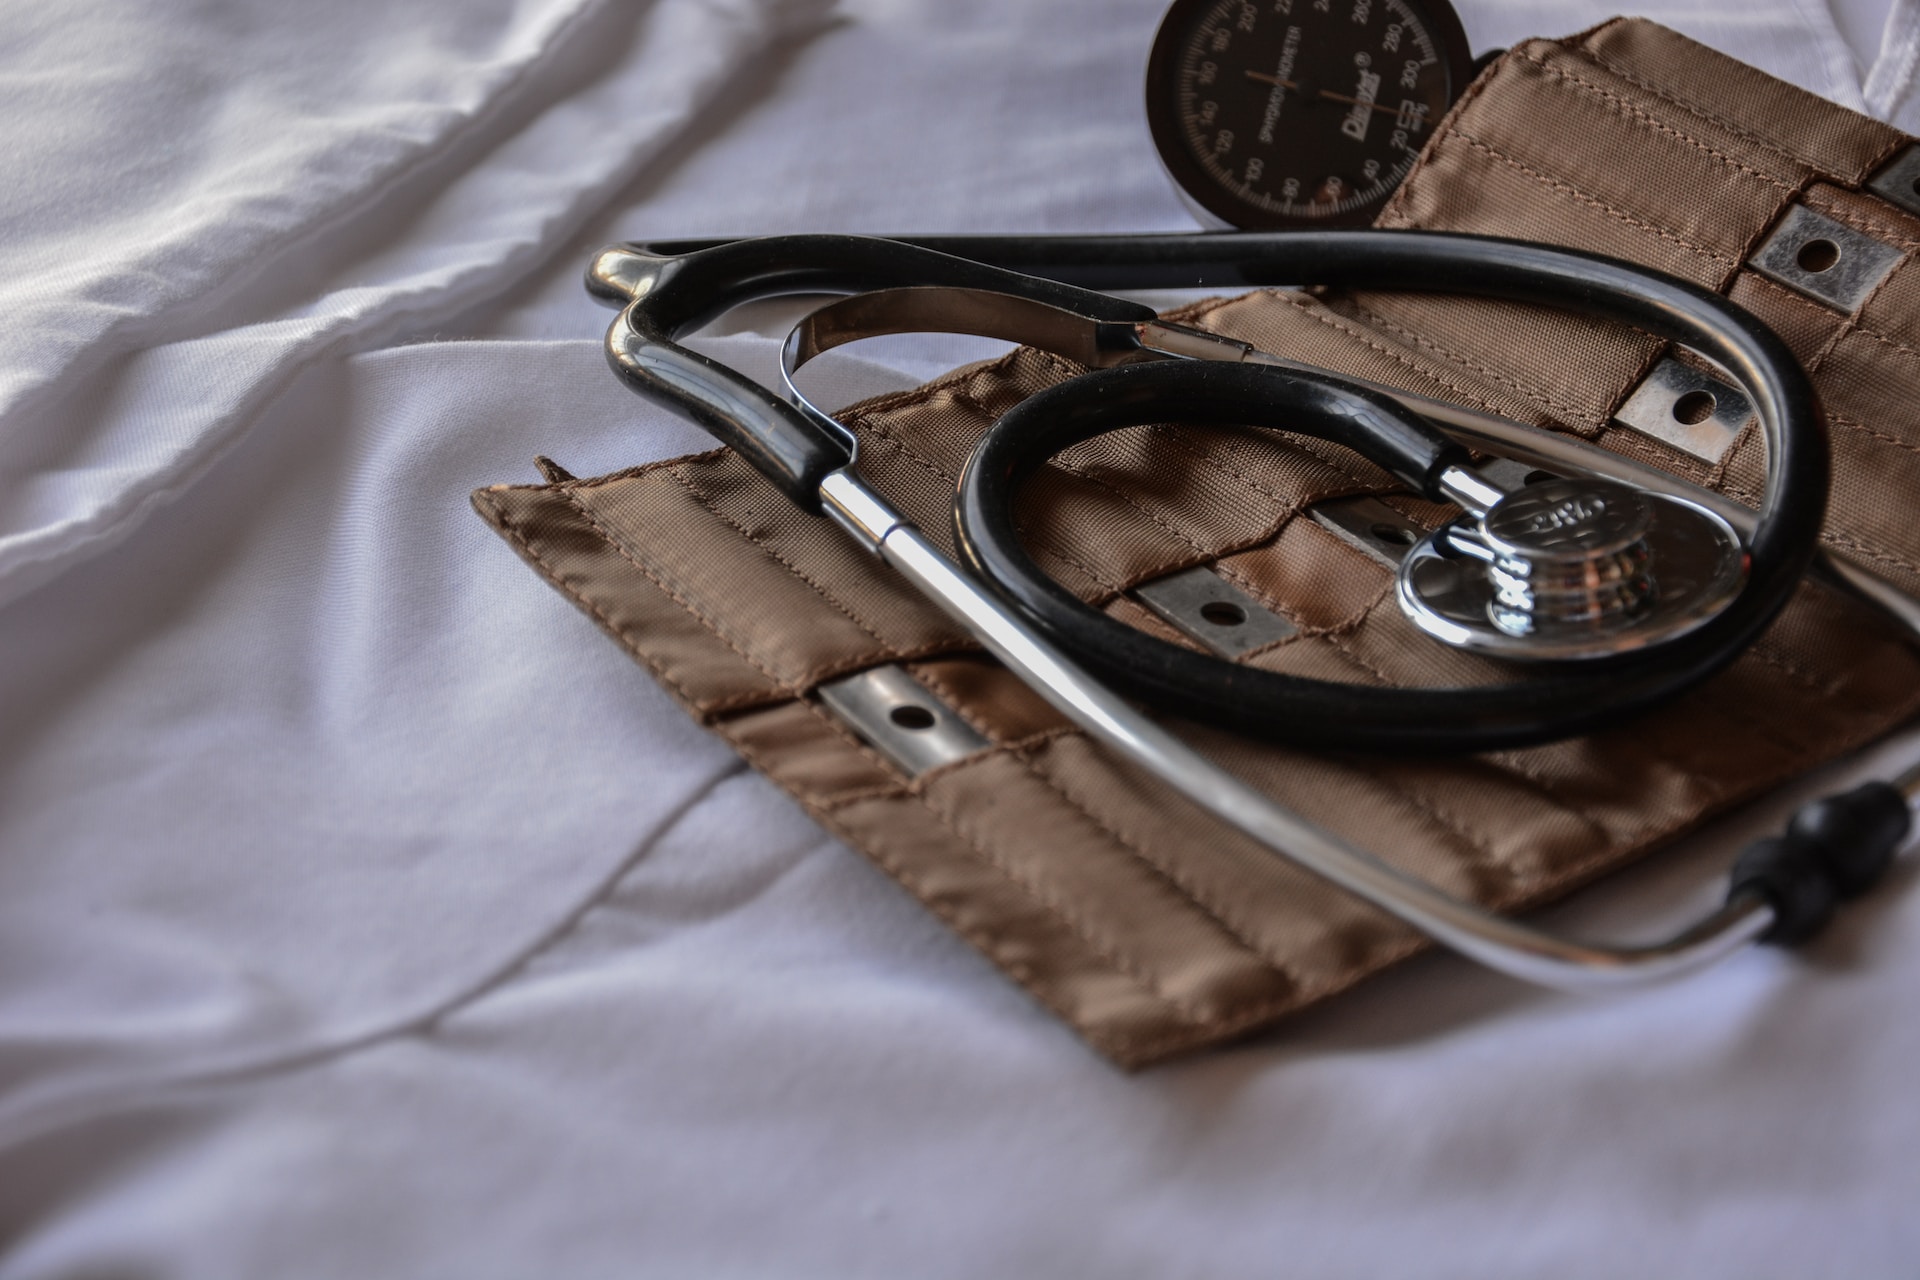 A stethoscope on a brown case 